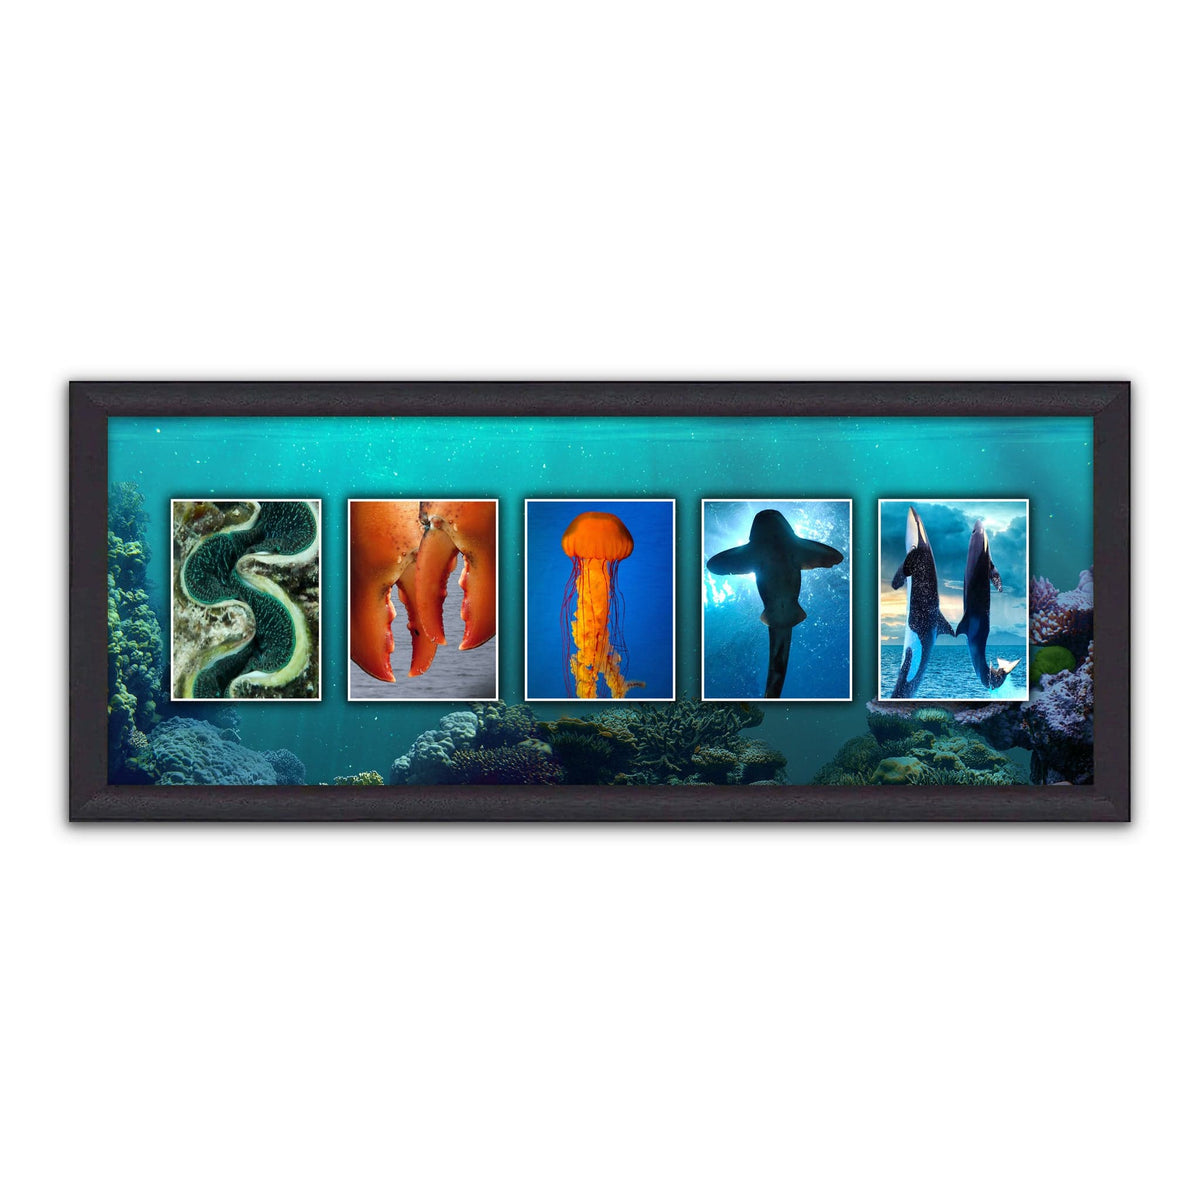 Marine Life Art Decor Using images of fish, dolphins, crabs, etc. to spell your name- framed canvas